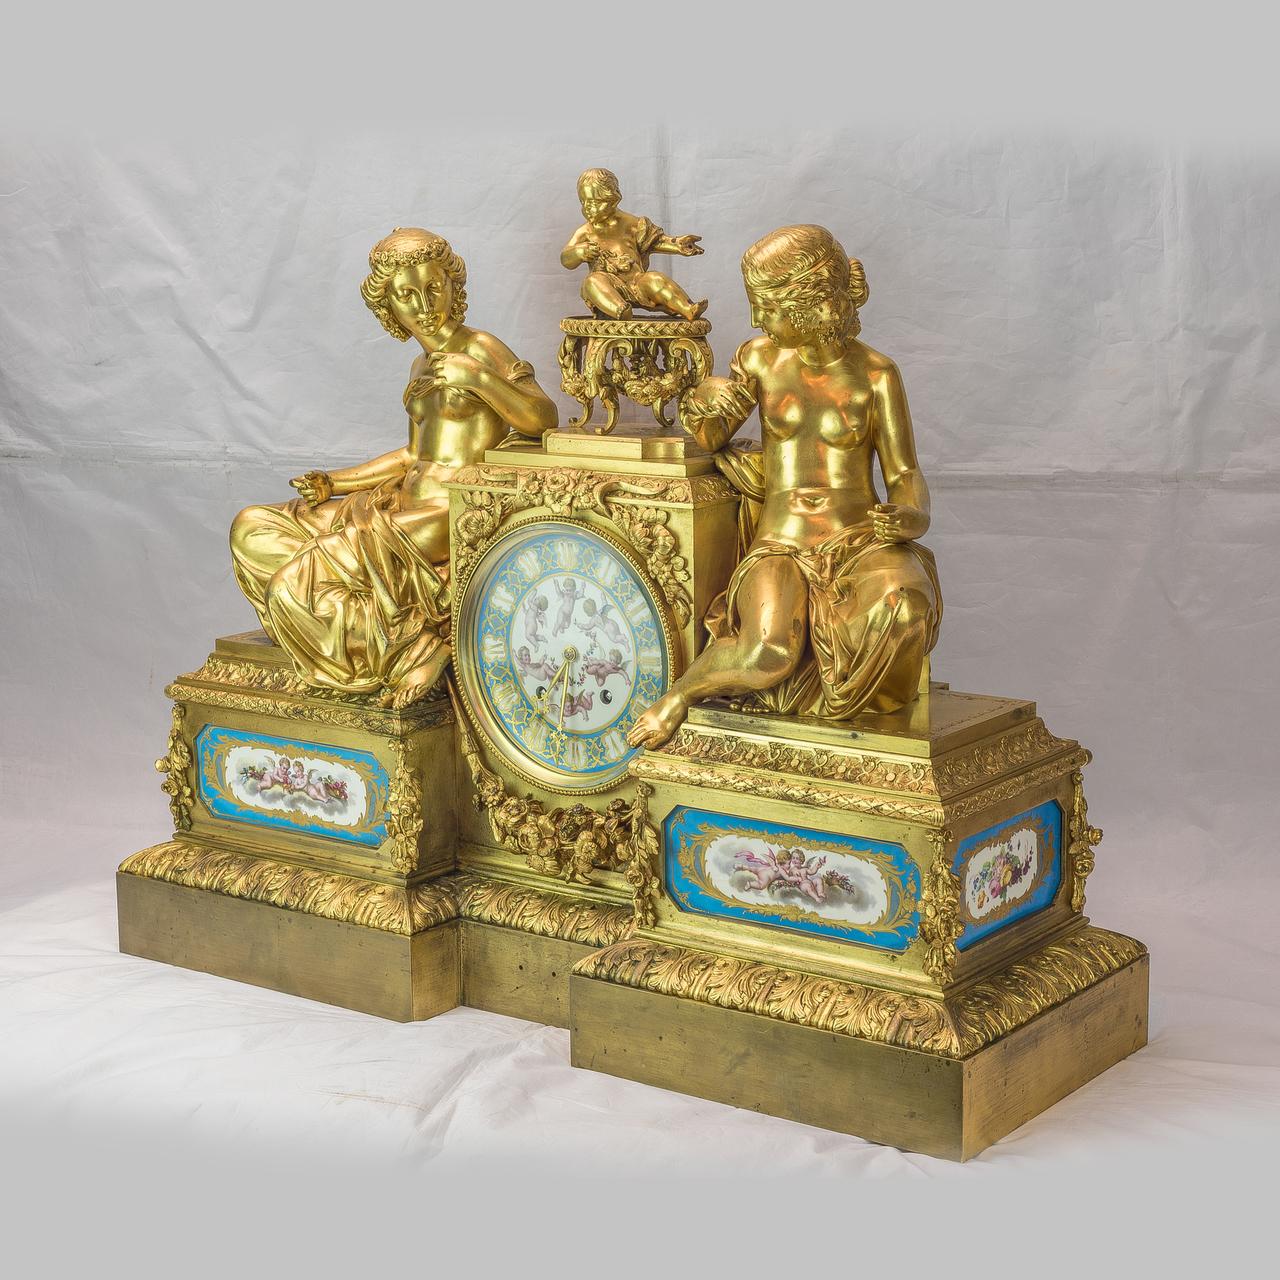 A Monumental Bourdin French figural gilt bronze mantel clock, depicting two women seated on the plinth with garland decoration and a cherub atop. Movement with rear plate stamped Bourdin A Paris and 3235. 

Maker: Bourdin à Paris
Origin: